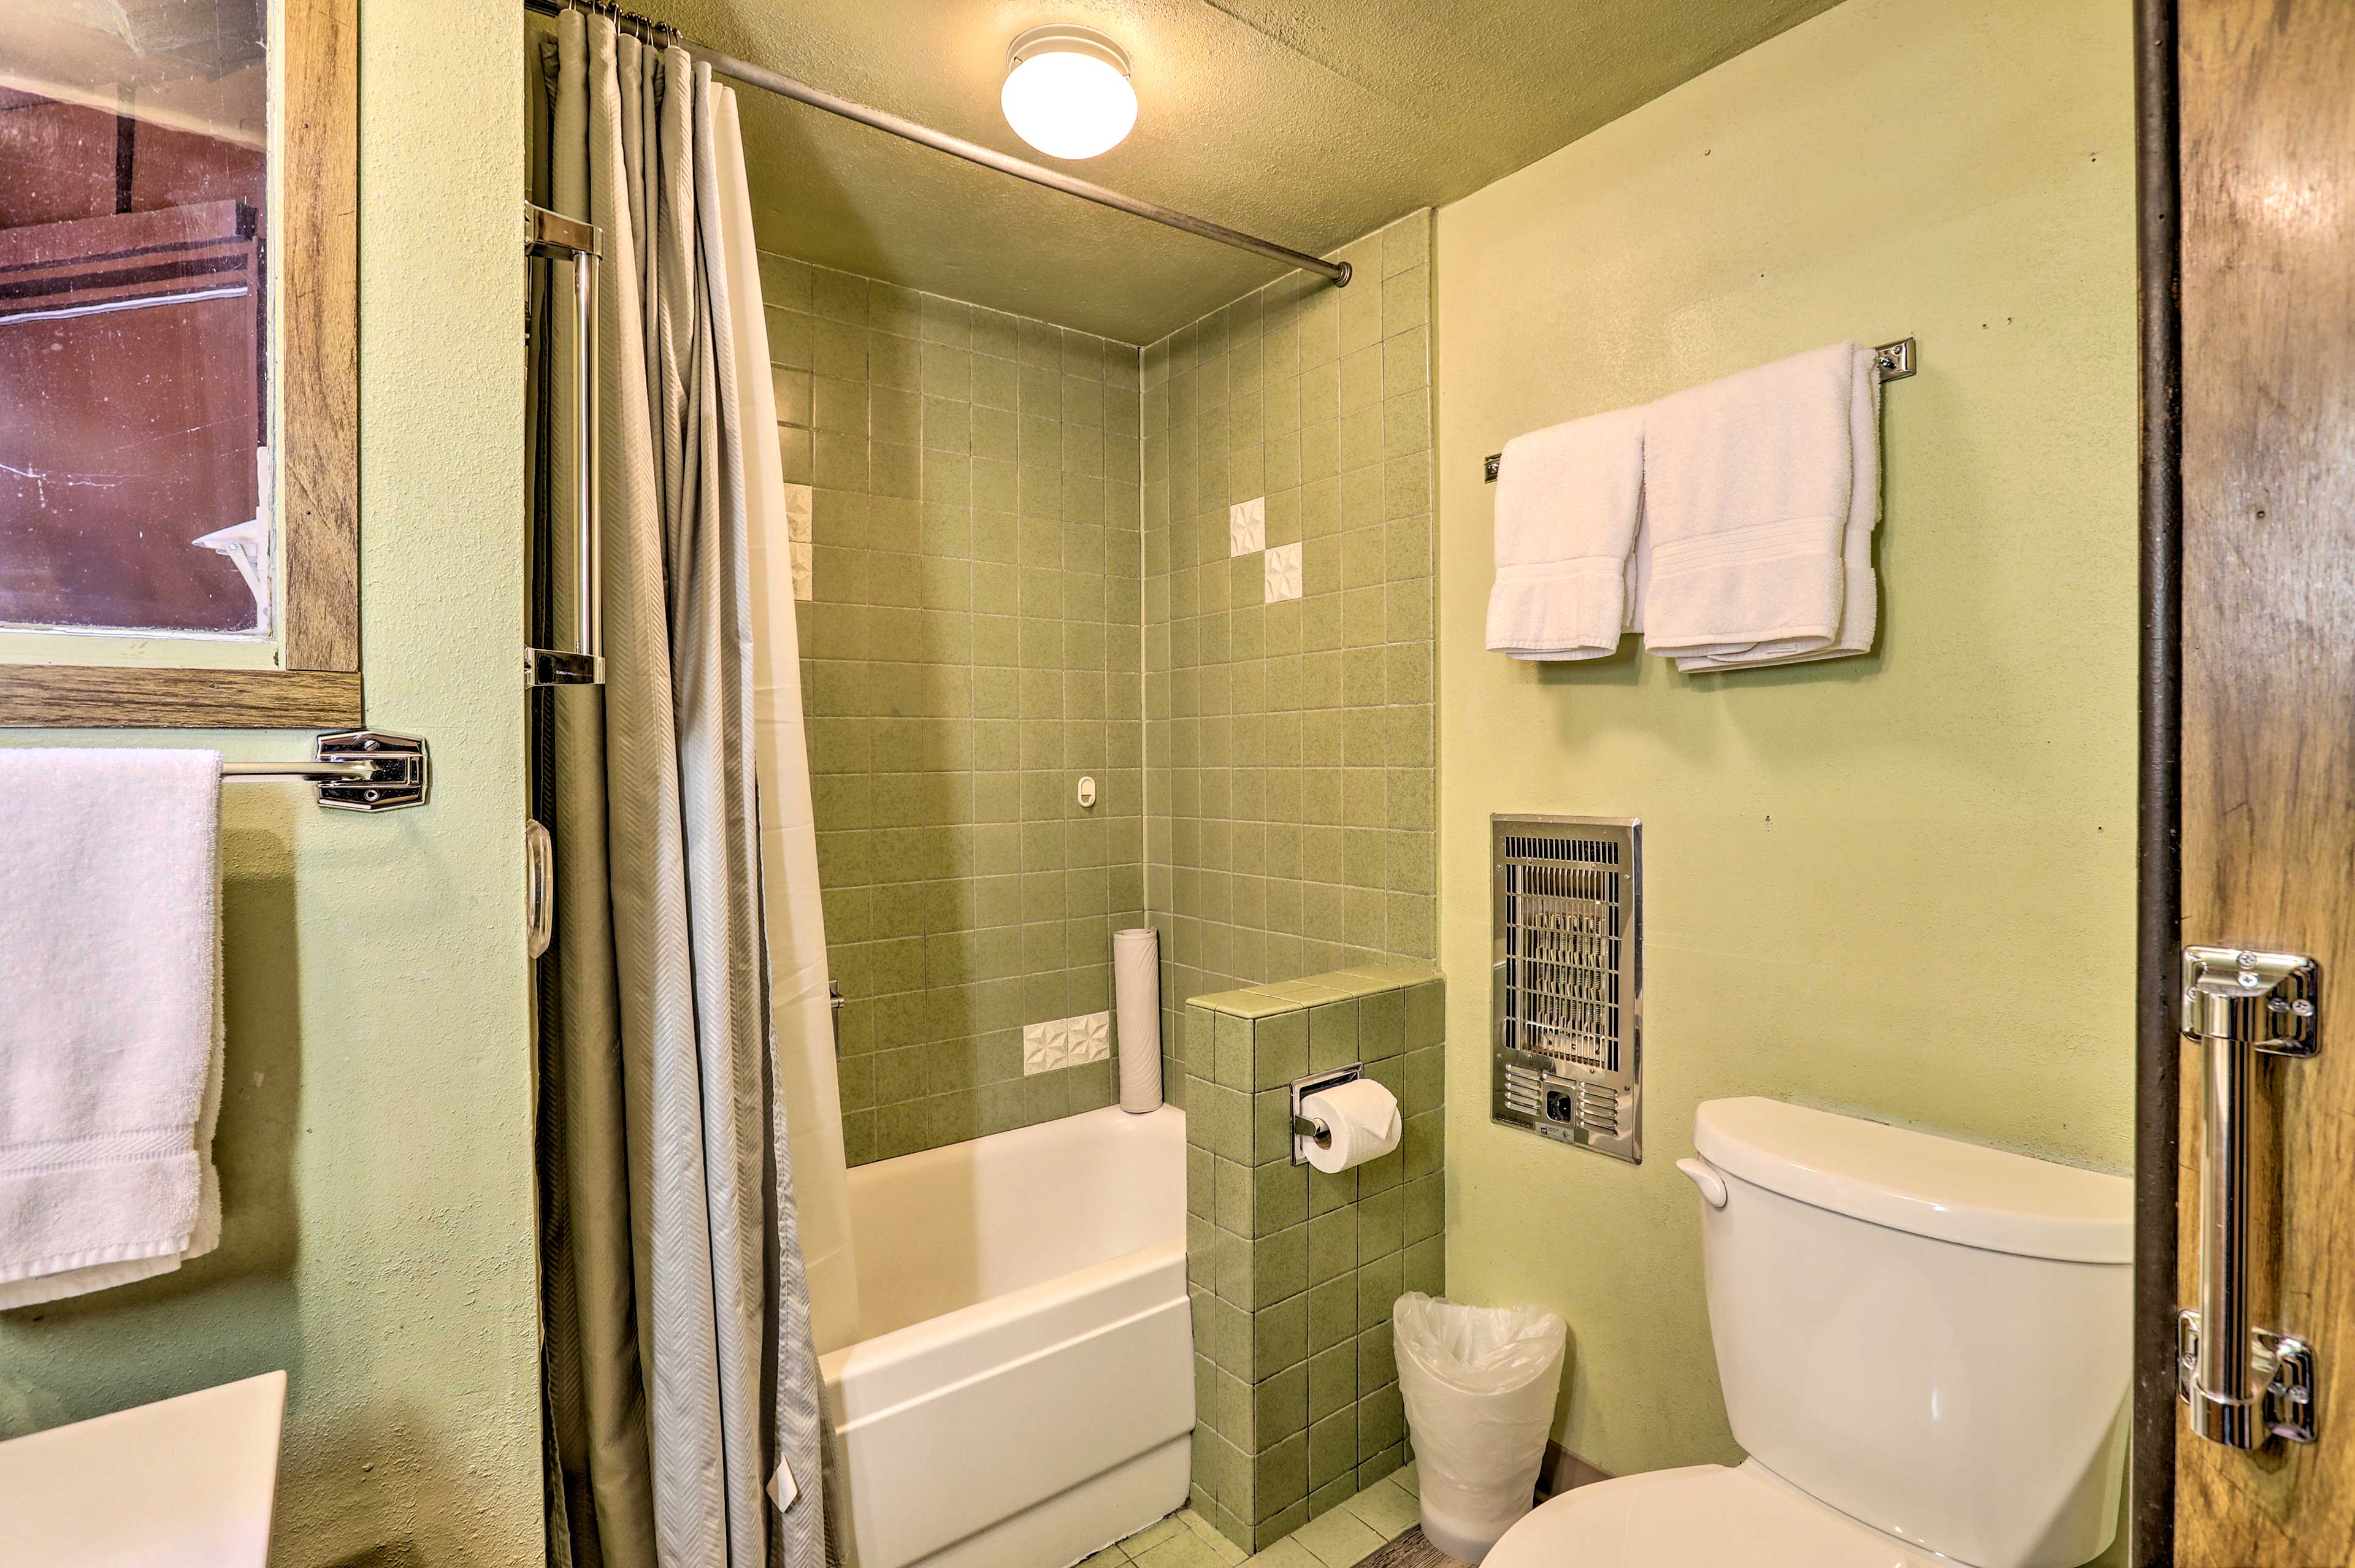 The second full bathroom features a shower/tub combo.